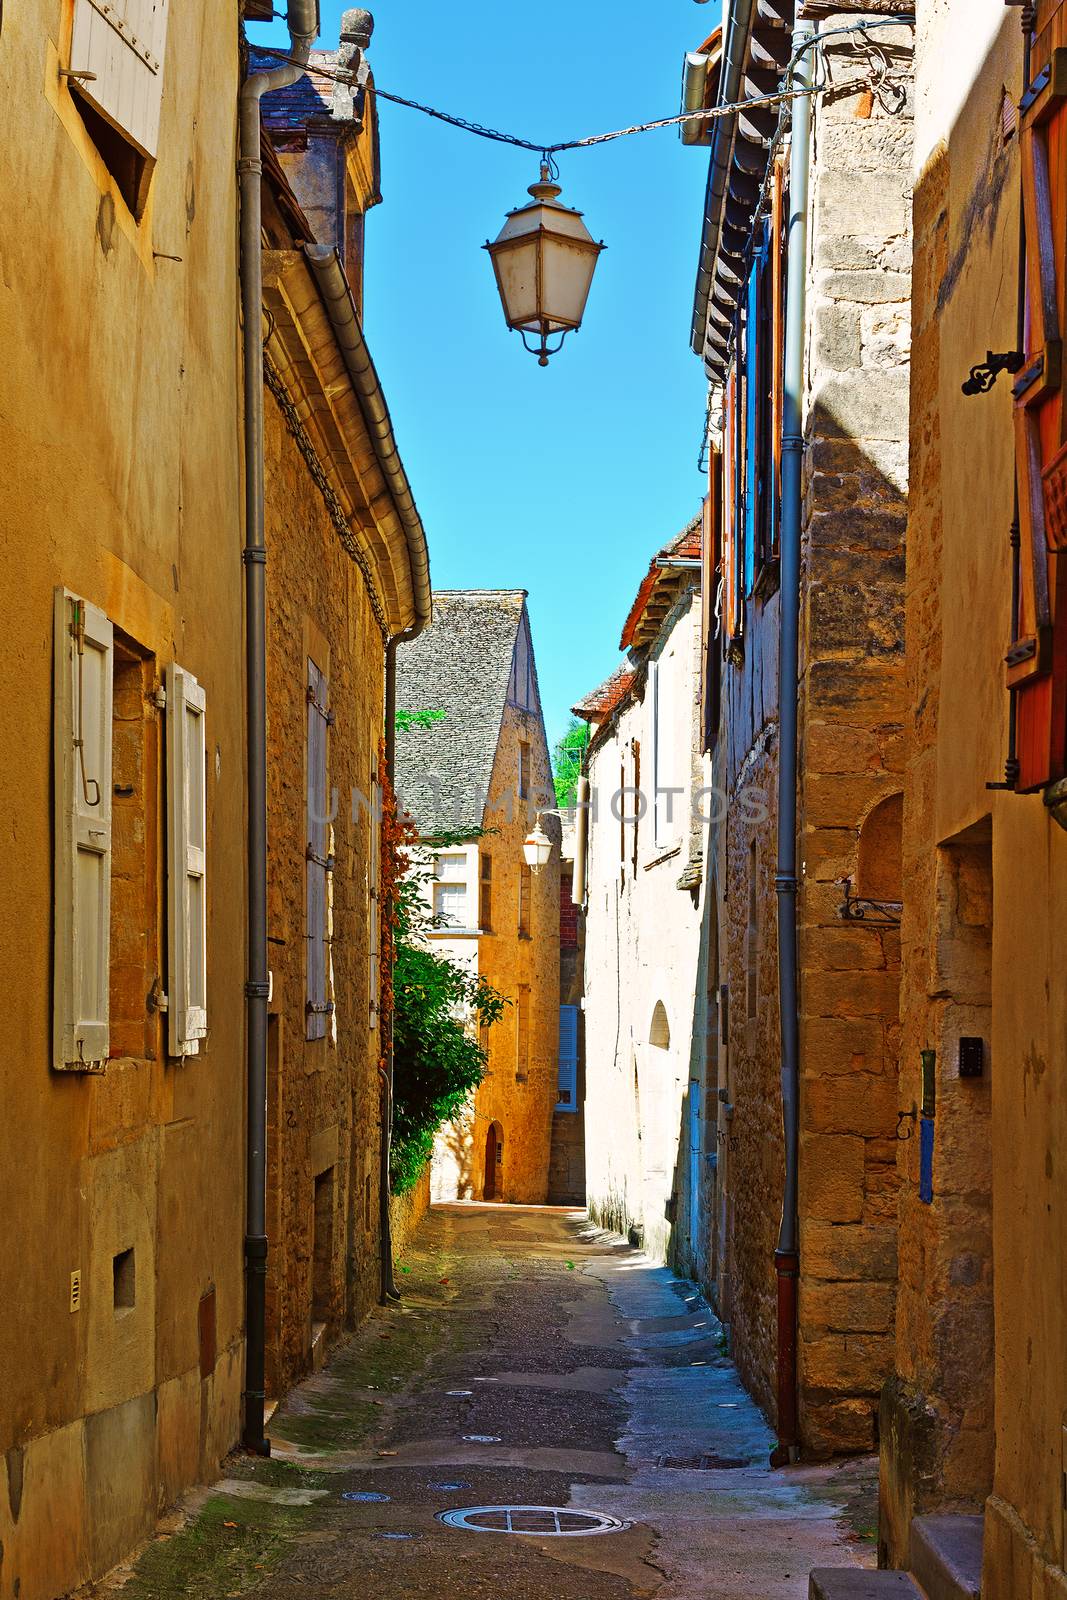 Deserted Street of the French City of Sarlat